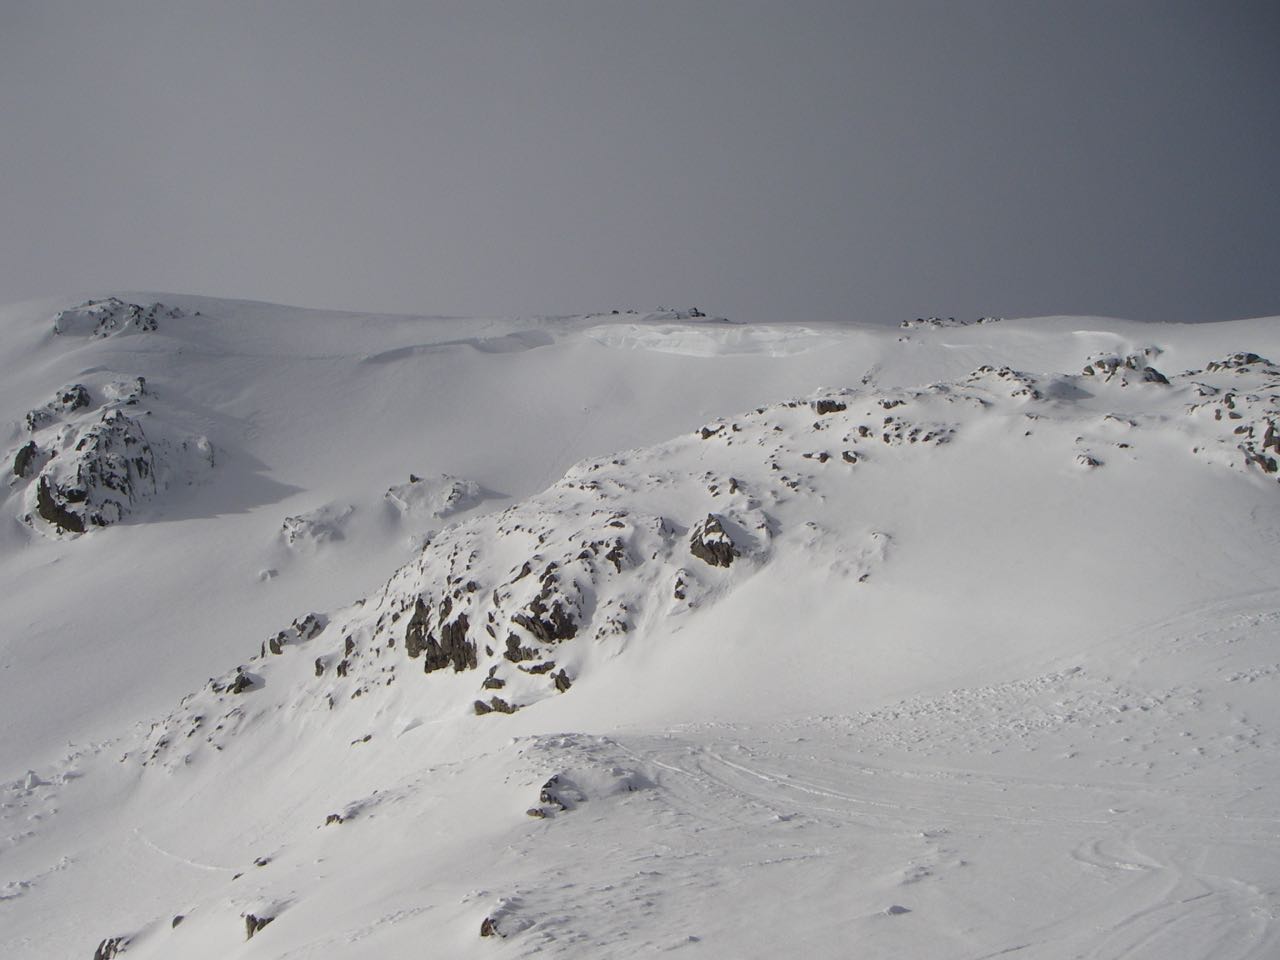 The crown wall on this avalanche was estimated to be 2.5 metres high.  It probably released Sunday night /Monday morning